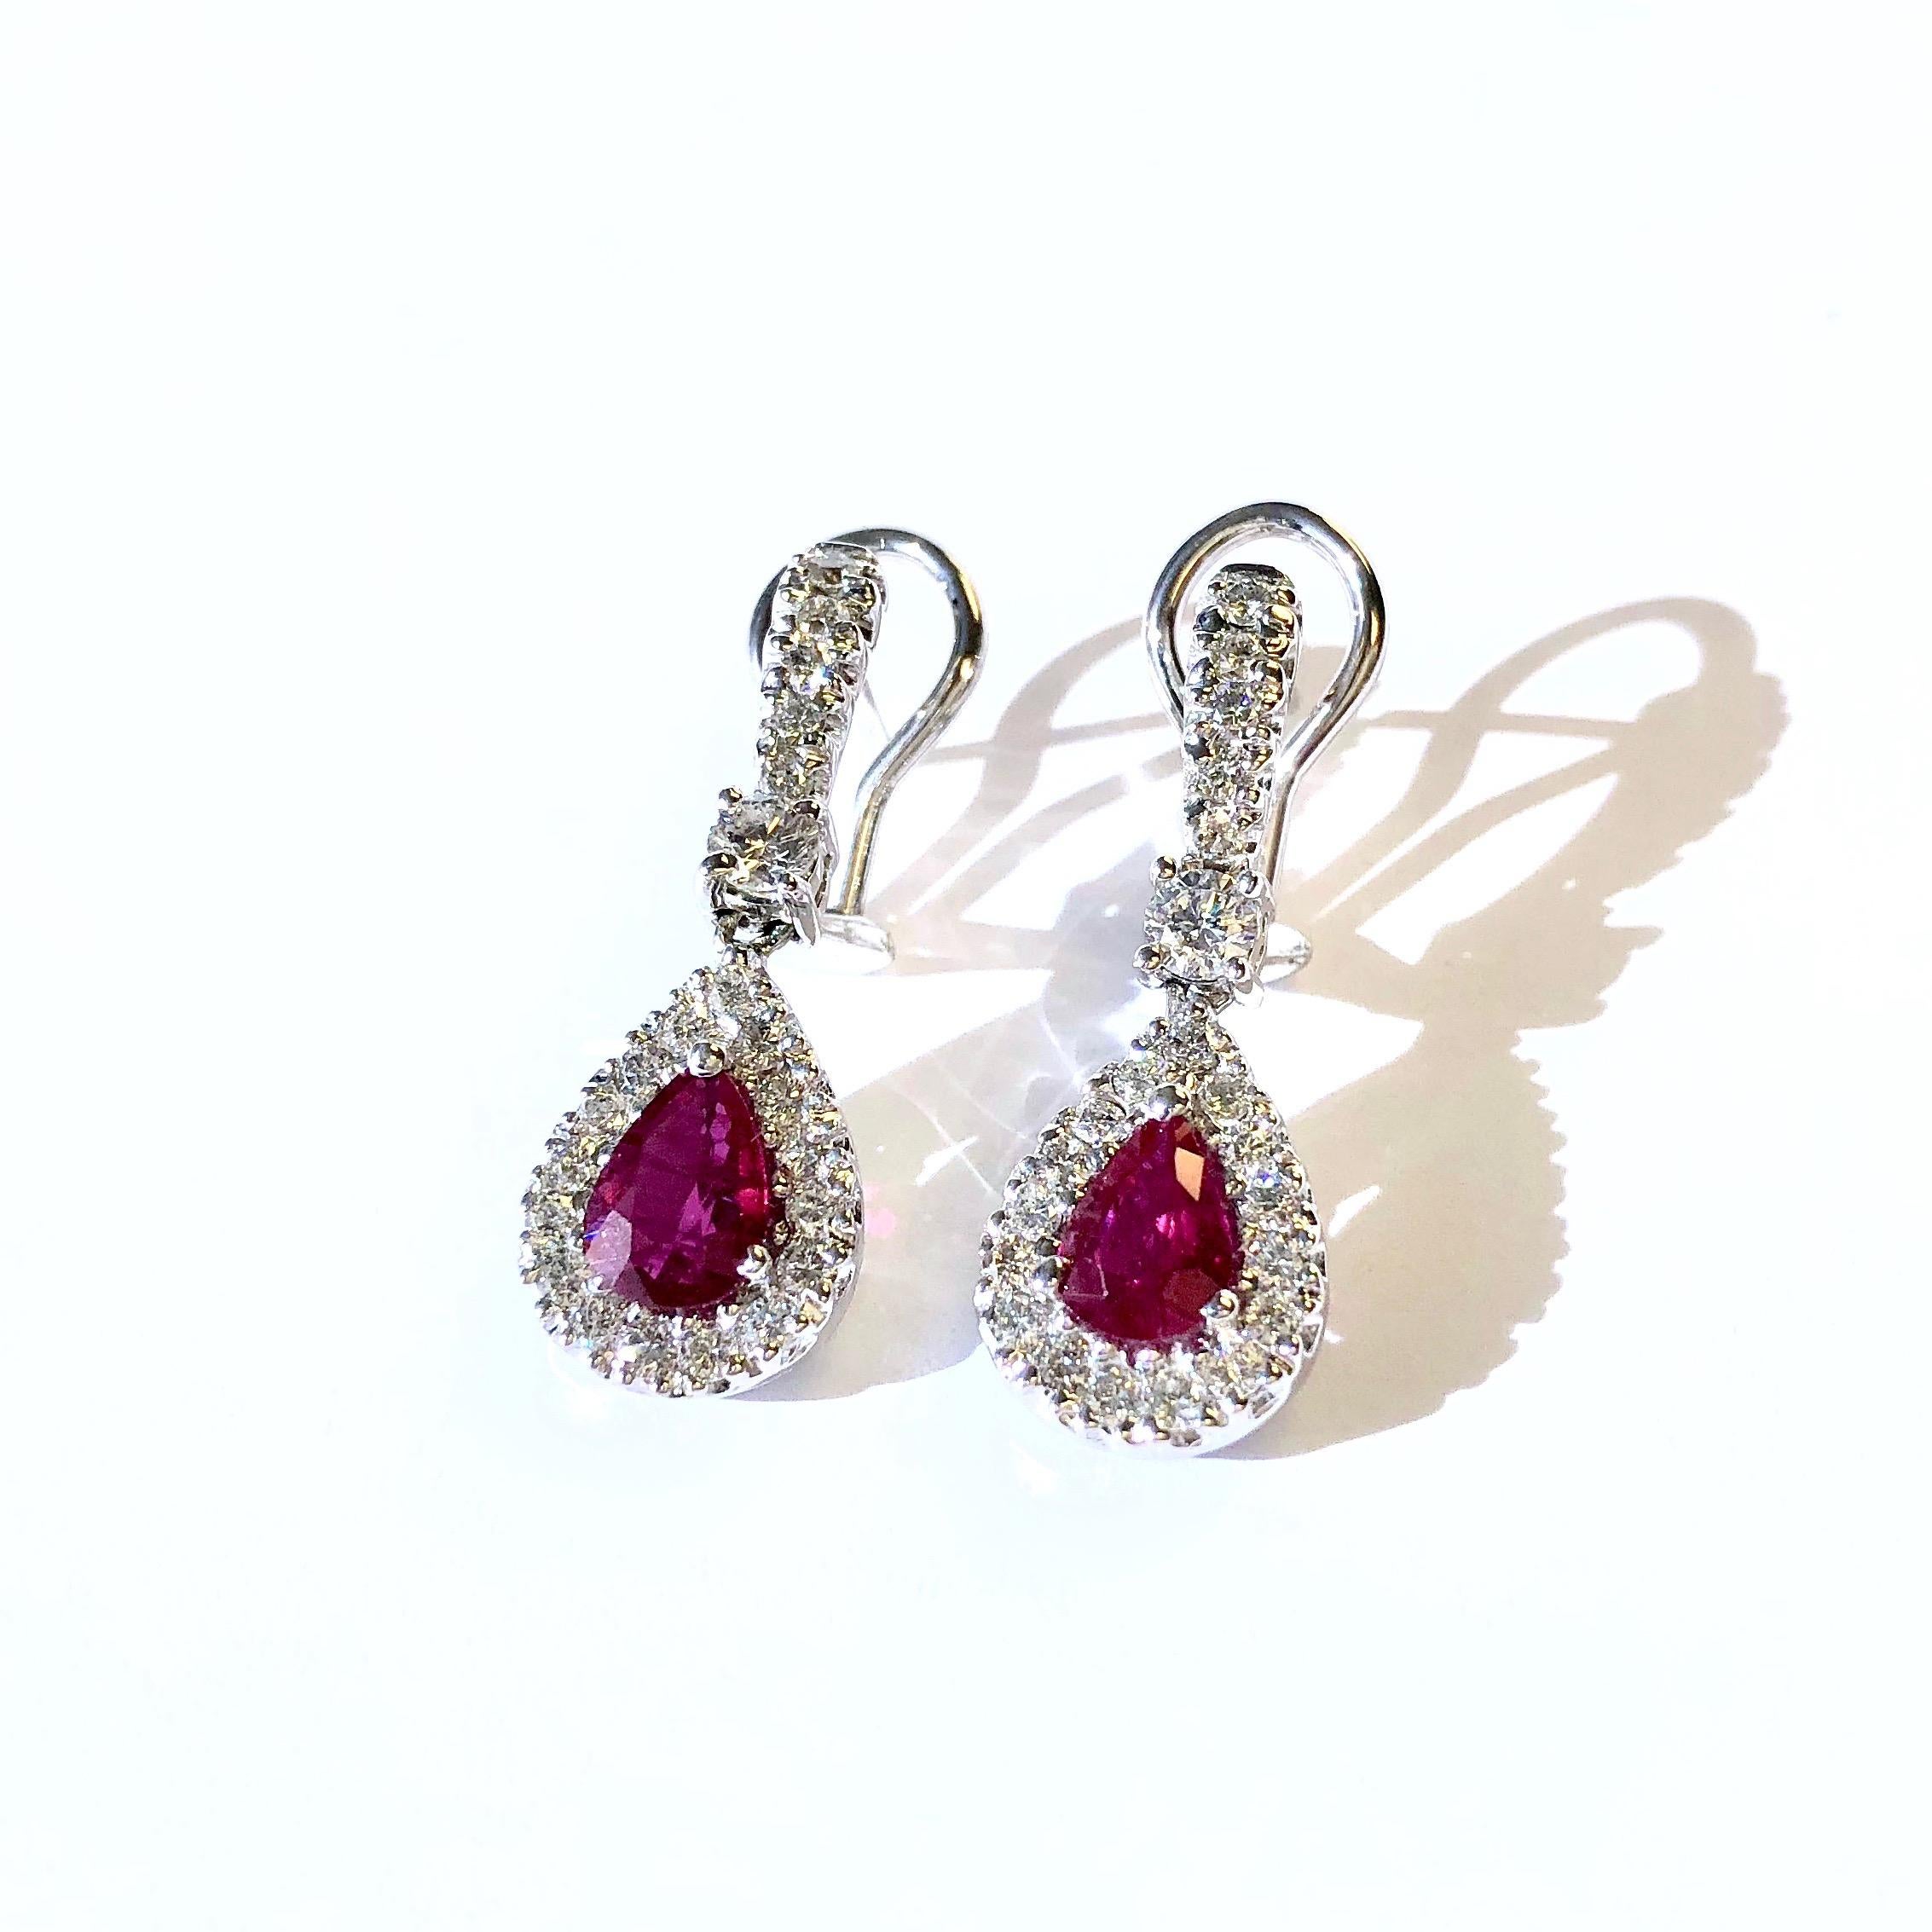 Crafted in 18K white gold, each earring features pear shape pendant set with a one carat ruby solitaire in a bezel of diamonds, supported by a diamond set ribbon. Post and omega backings for added security. 
44 round brilliant cit diamonds,